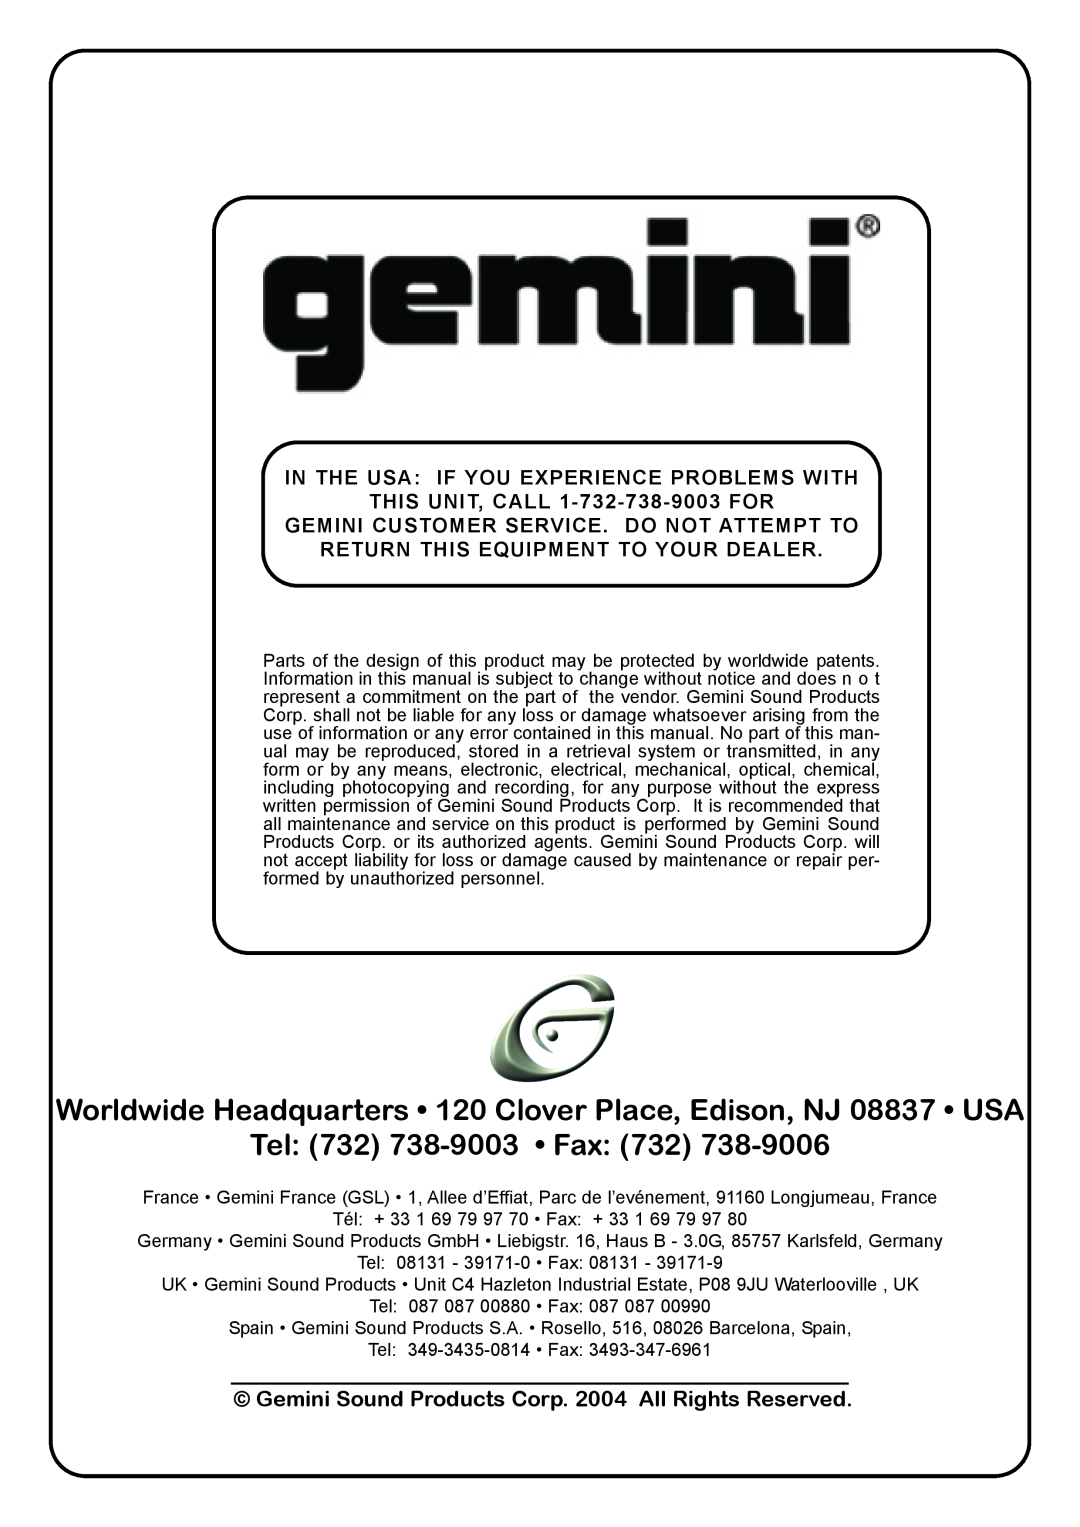 Gemini XL-120MKII In The Usa If You Experience Problems With, THIS UNIT, CALL 1-732-738-9003FOR, Tel 732 738-9003 Fax 